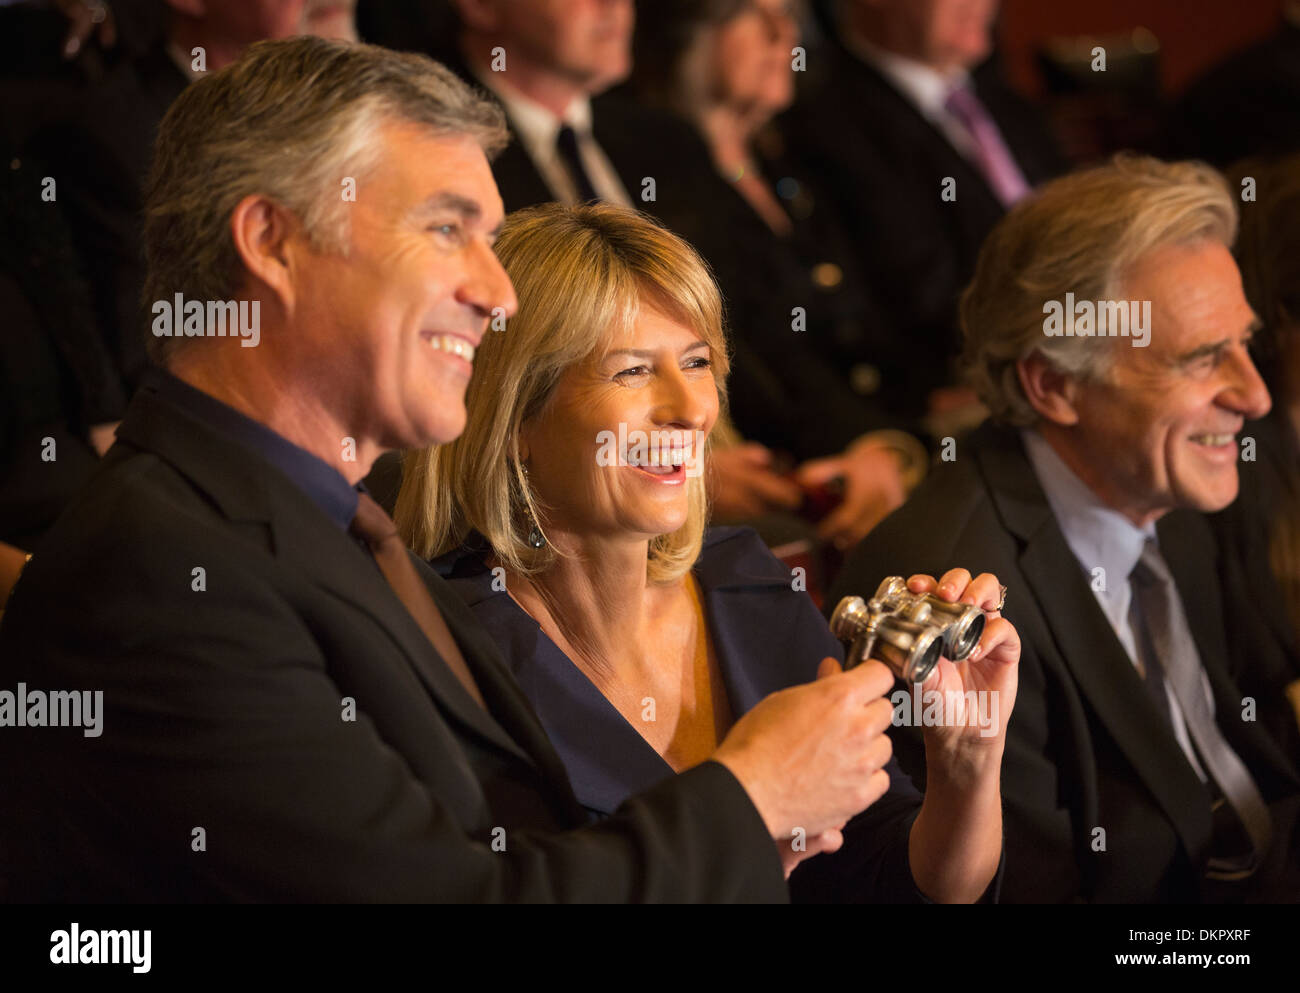 Happy couple holding opera glasses in theater audience Stock Photo